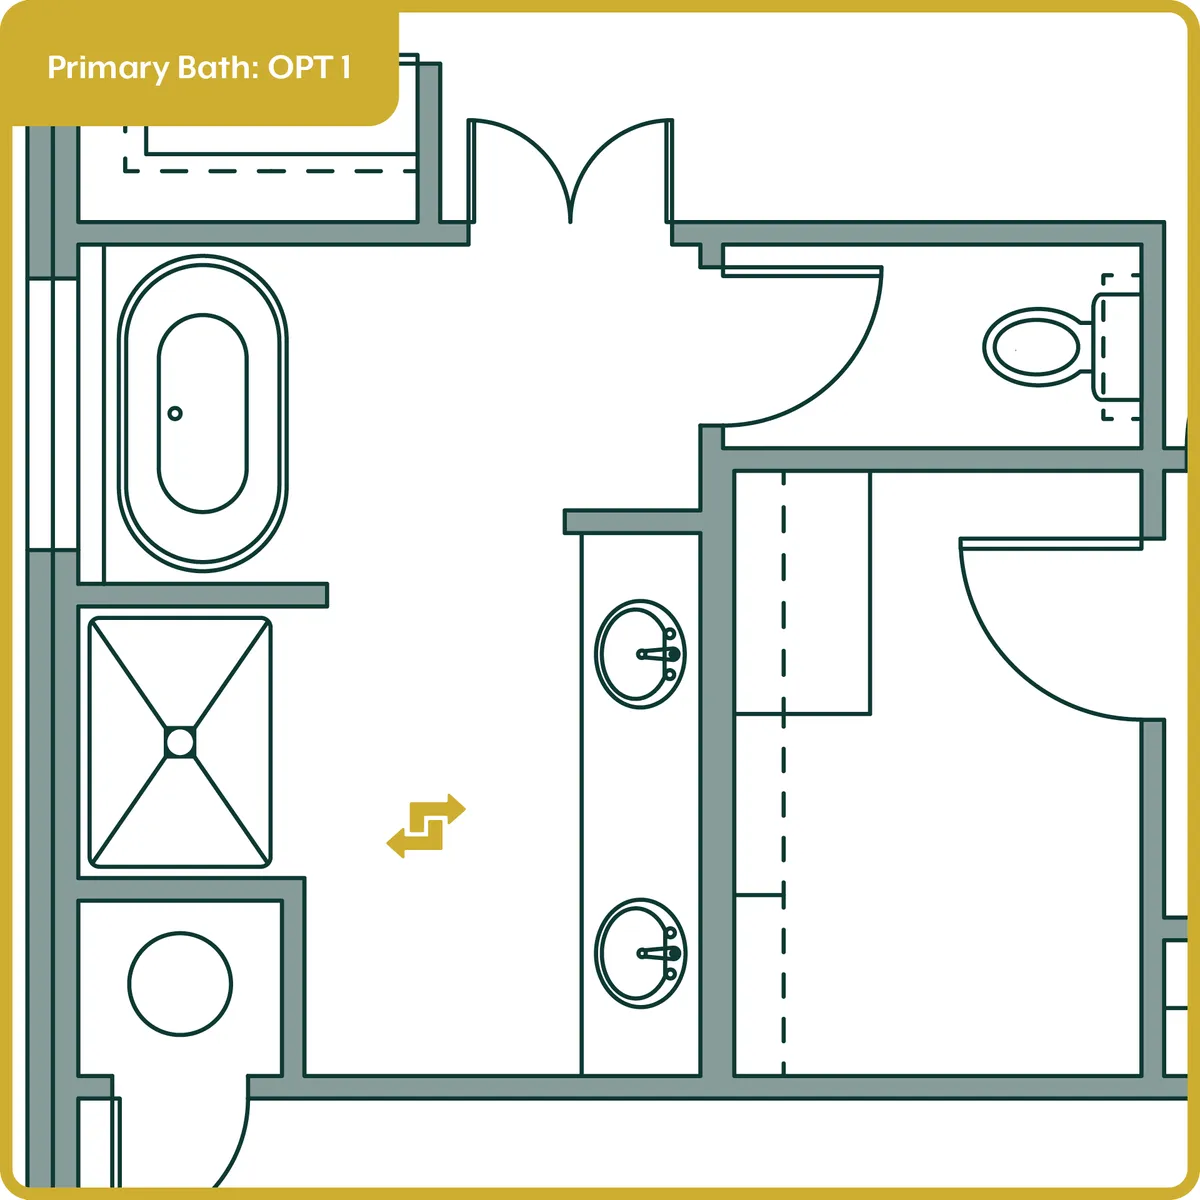 Lawrence. Lawrence Floor Plan - Primary Bath: OPT 1